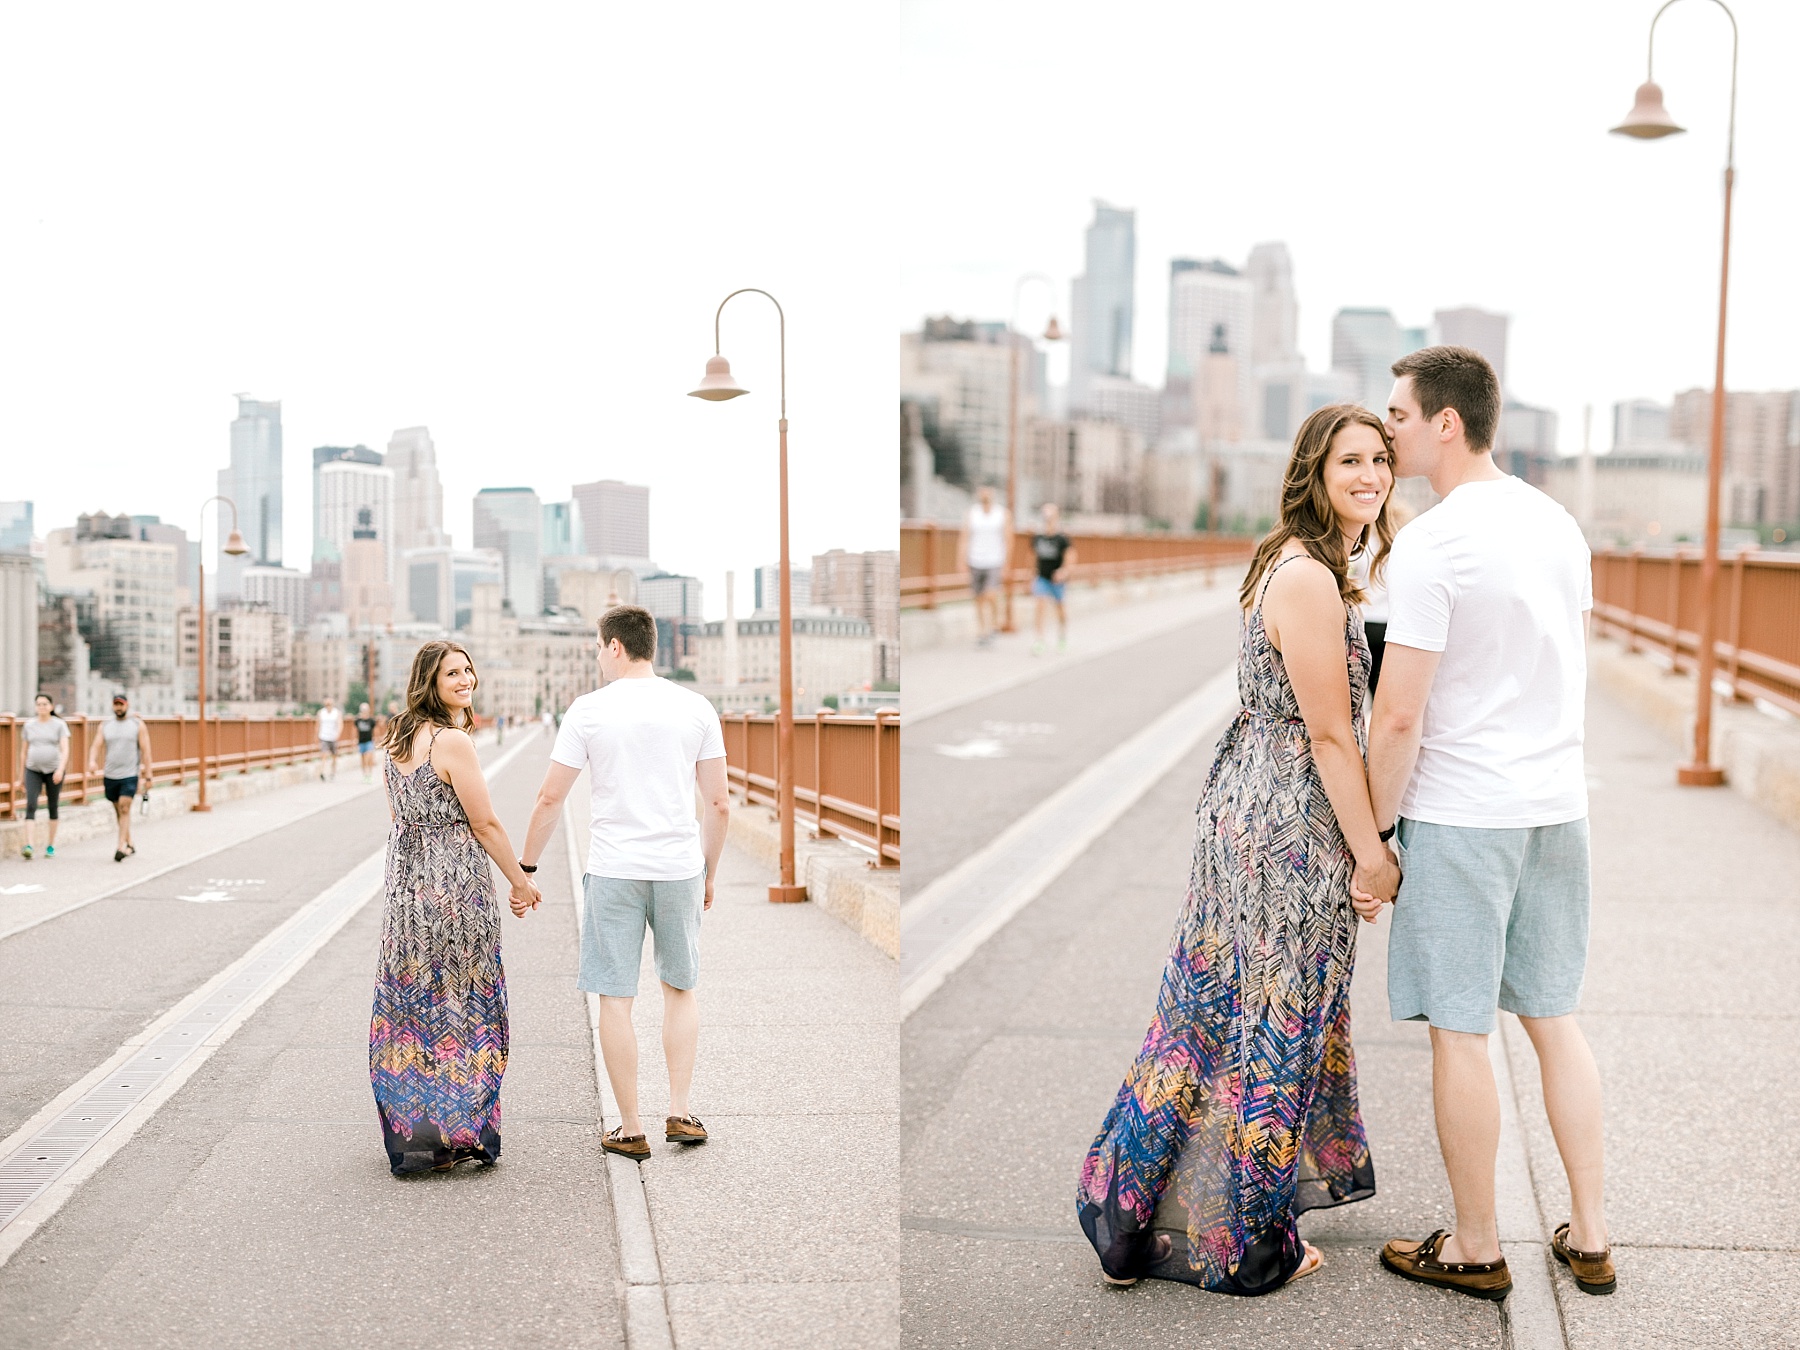 They grew up in the same small town, but met in Minneapolis, so it's perfect that they now have Stone Arch Bridge Minneapolis engagement photos!